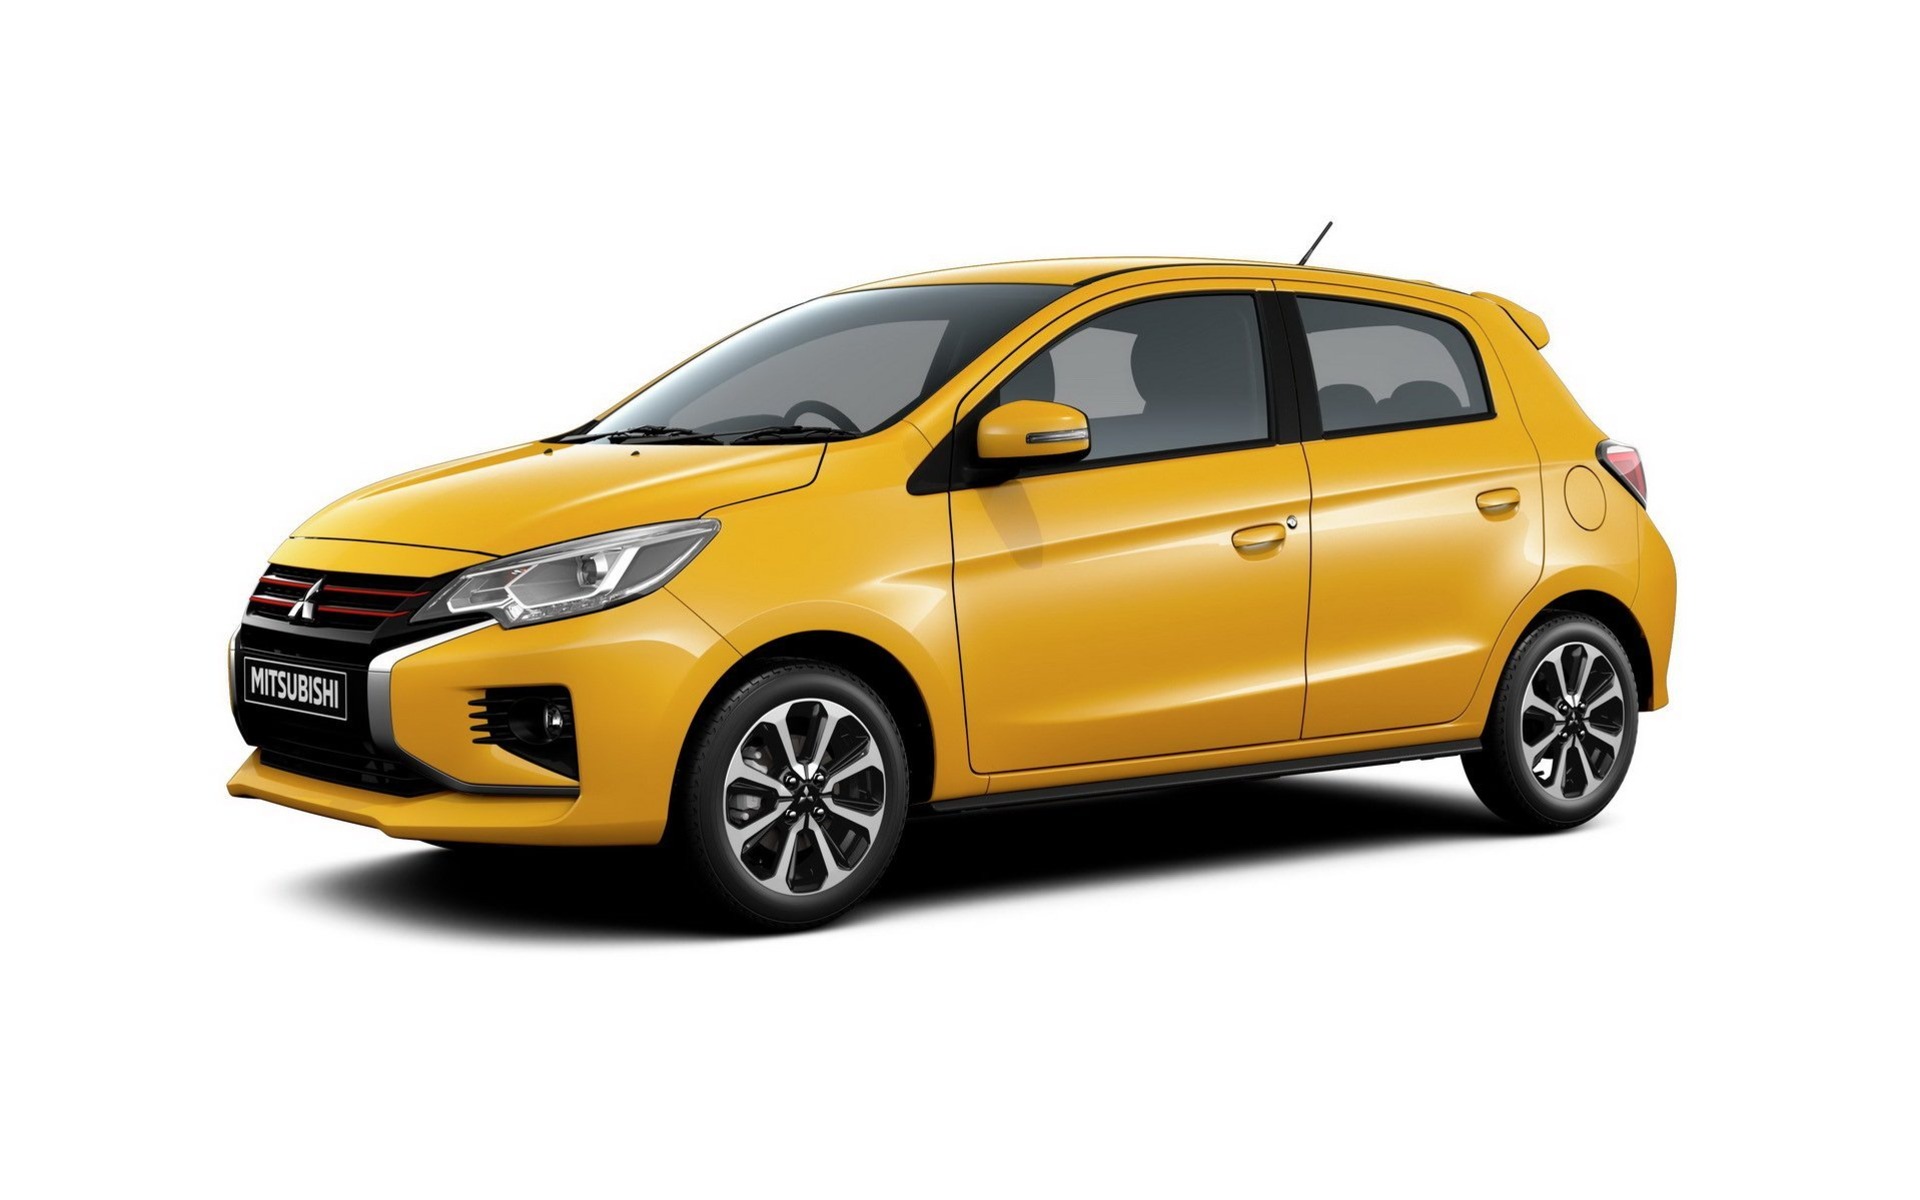 Refreshed 2020 Mitsubishi Mirage to Return to Canada - The Car Guide